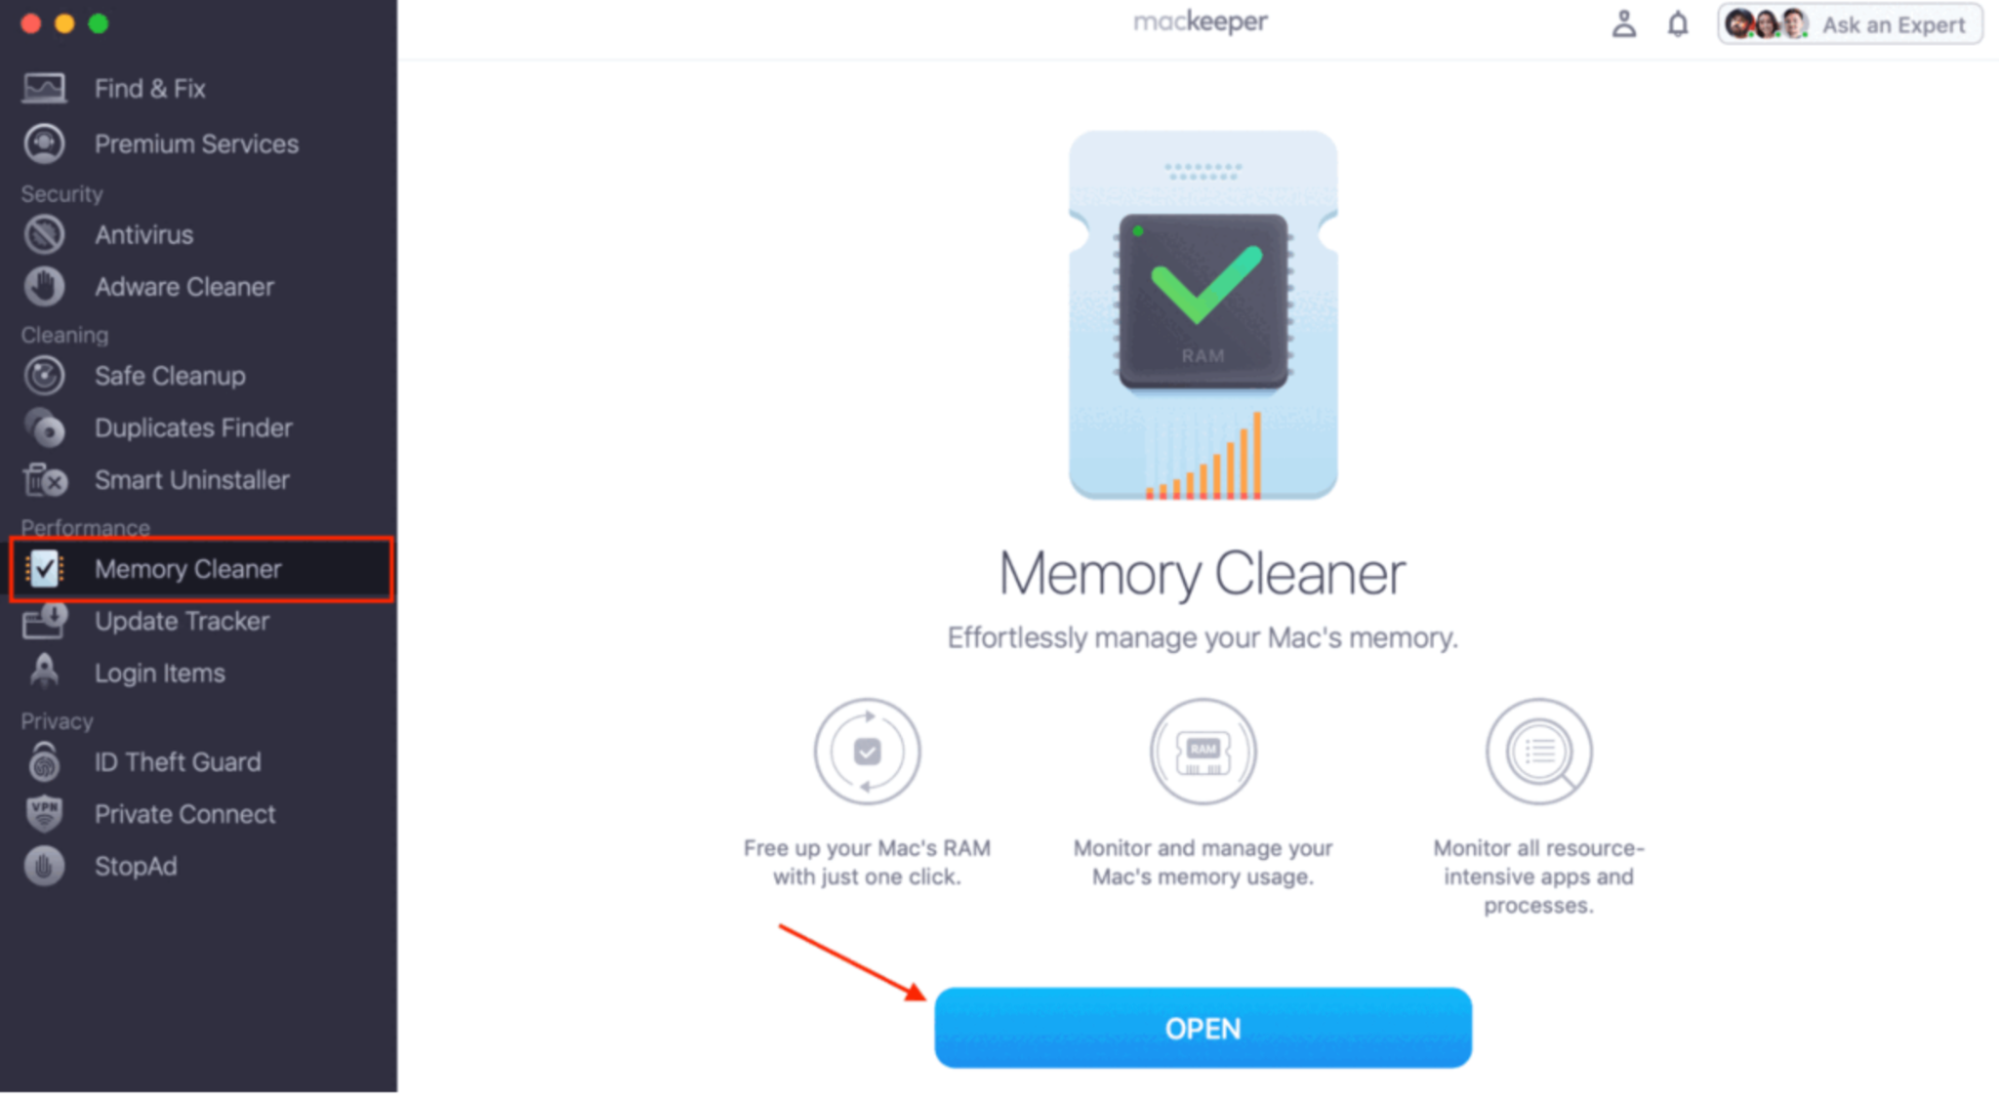 The Memory Cleaner tool inside MacKeeper on Mac. Click Open to start it.